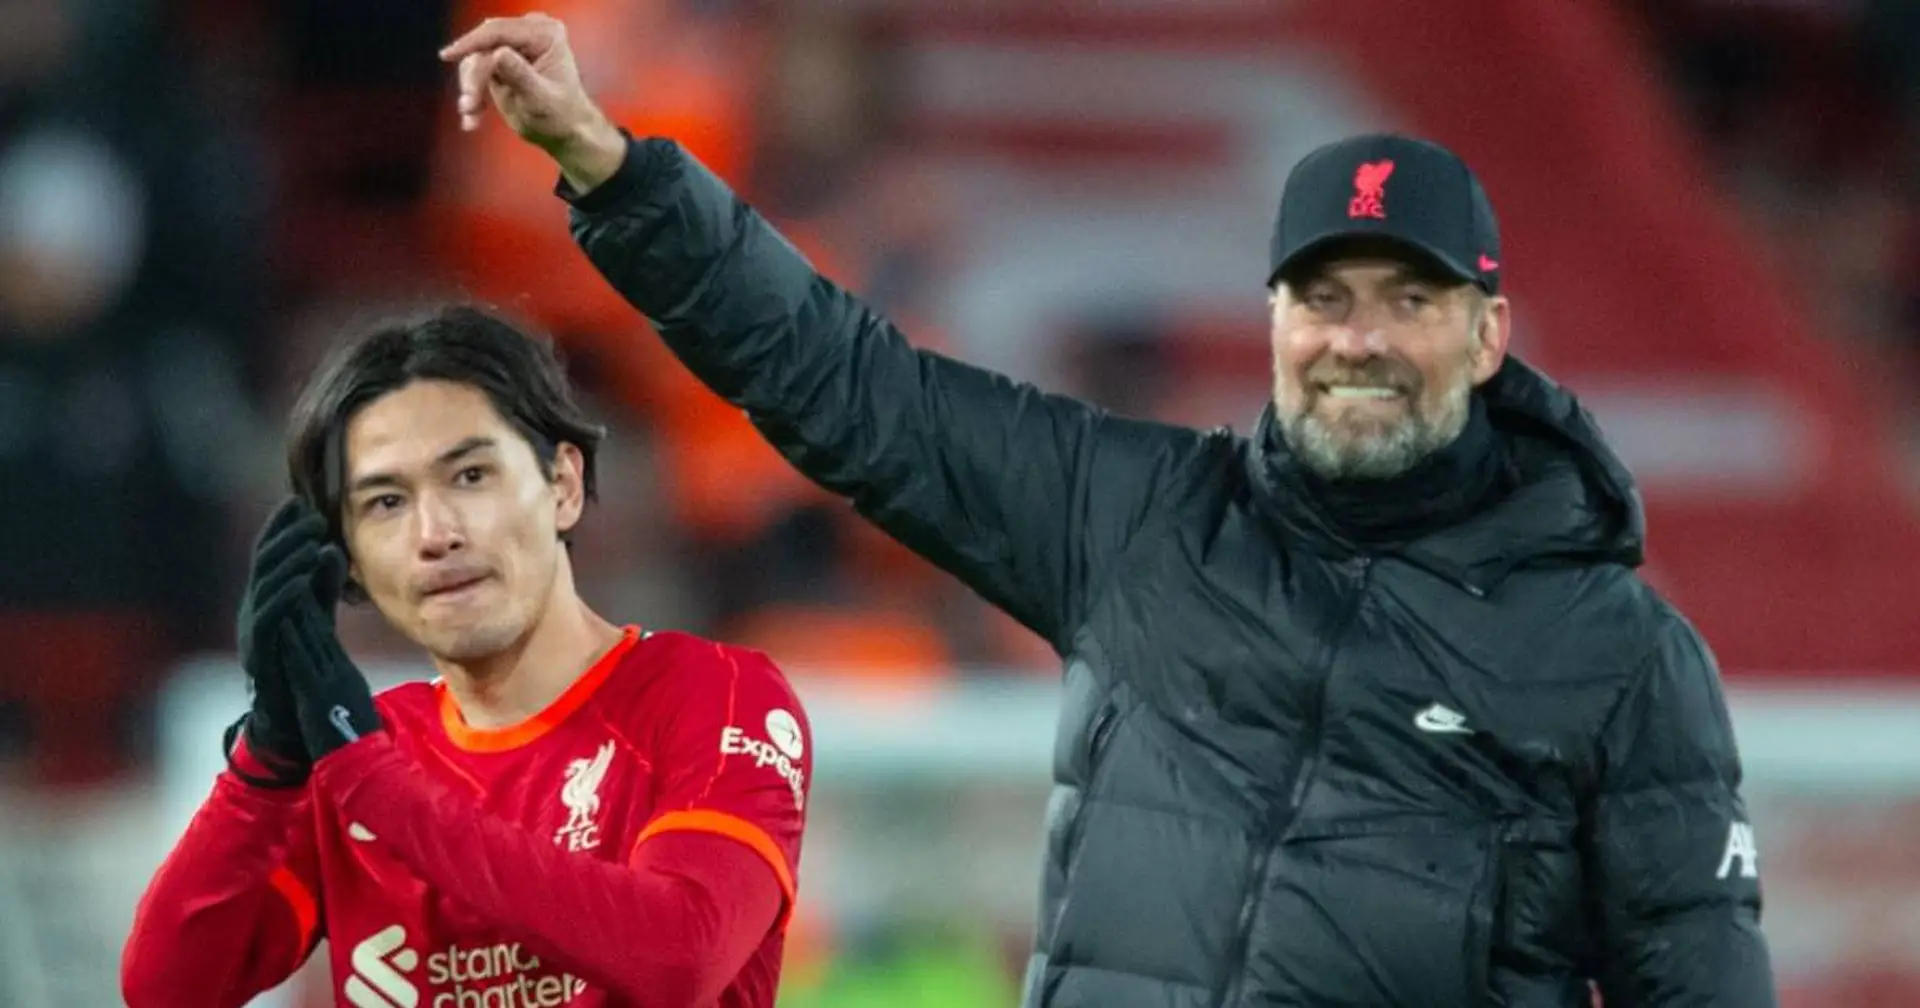 'A manager's dream, his achievements will stand the test of time': Klopp's emotional goodbye message to Minamino